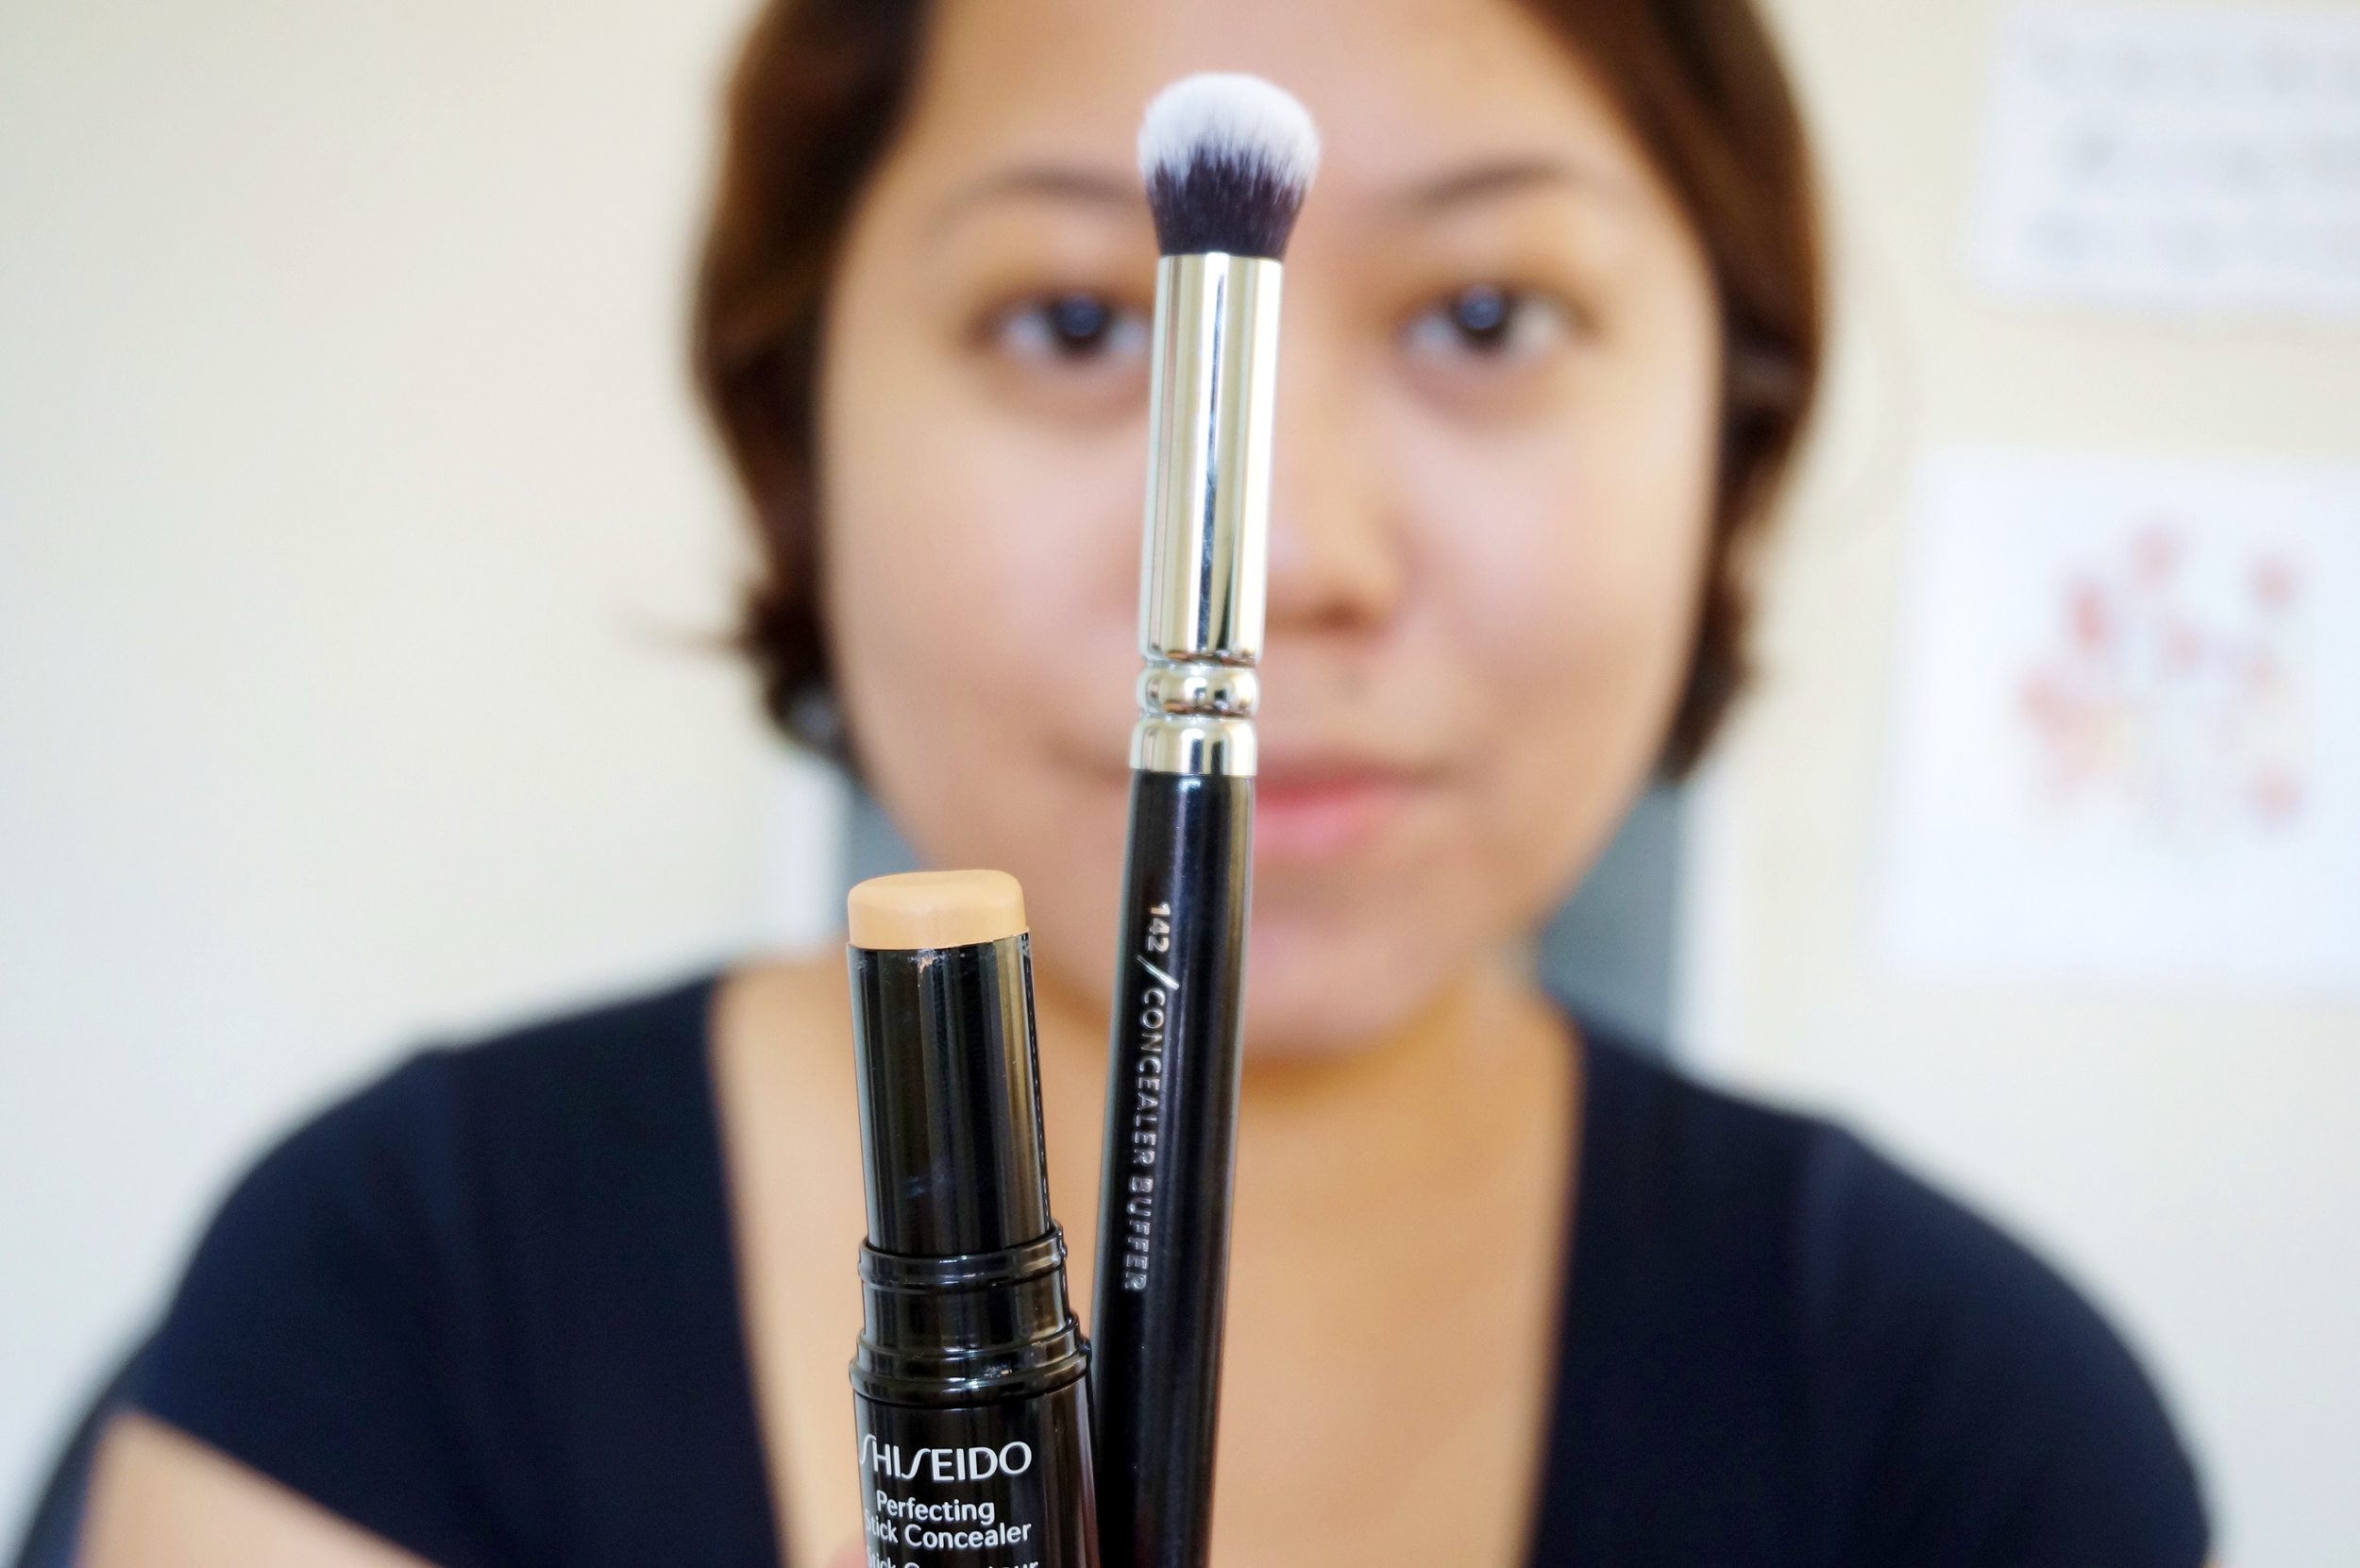 A concealer + a review: Shiseido Perfecting Stick Concealer — Project Vanity